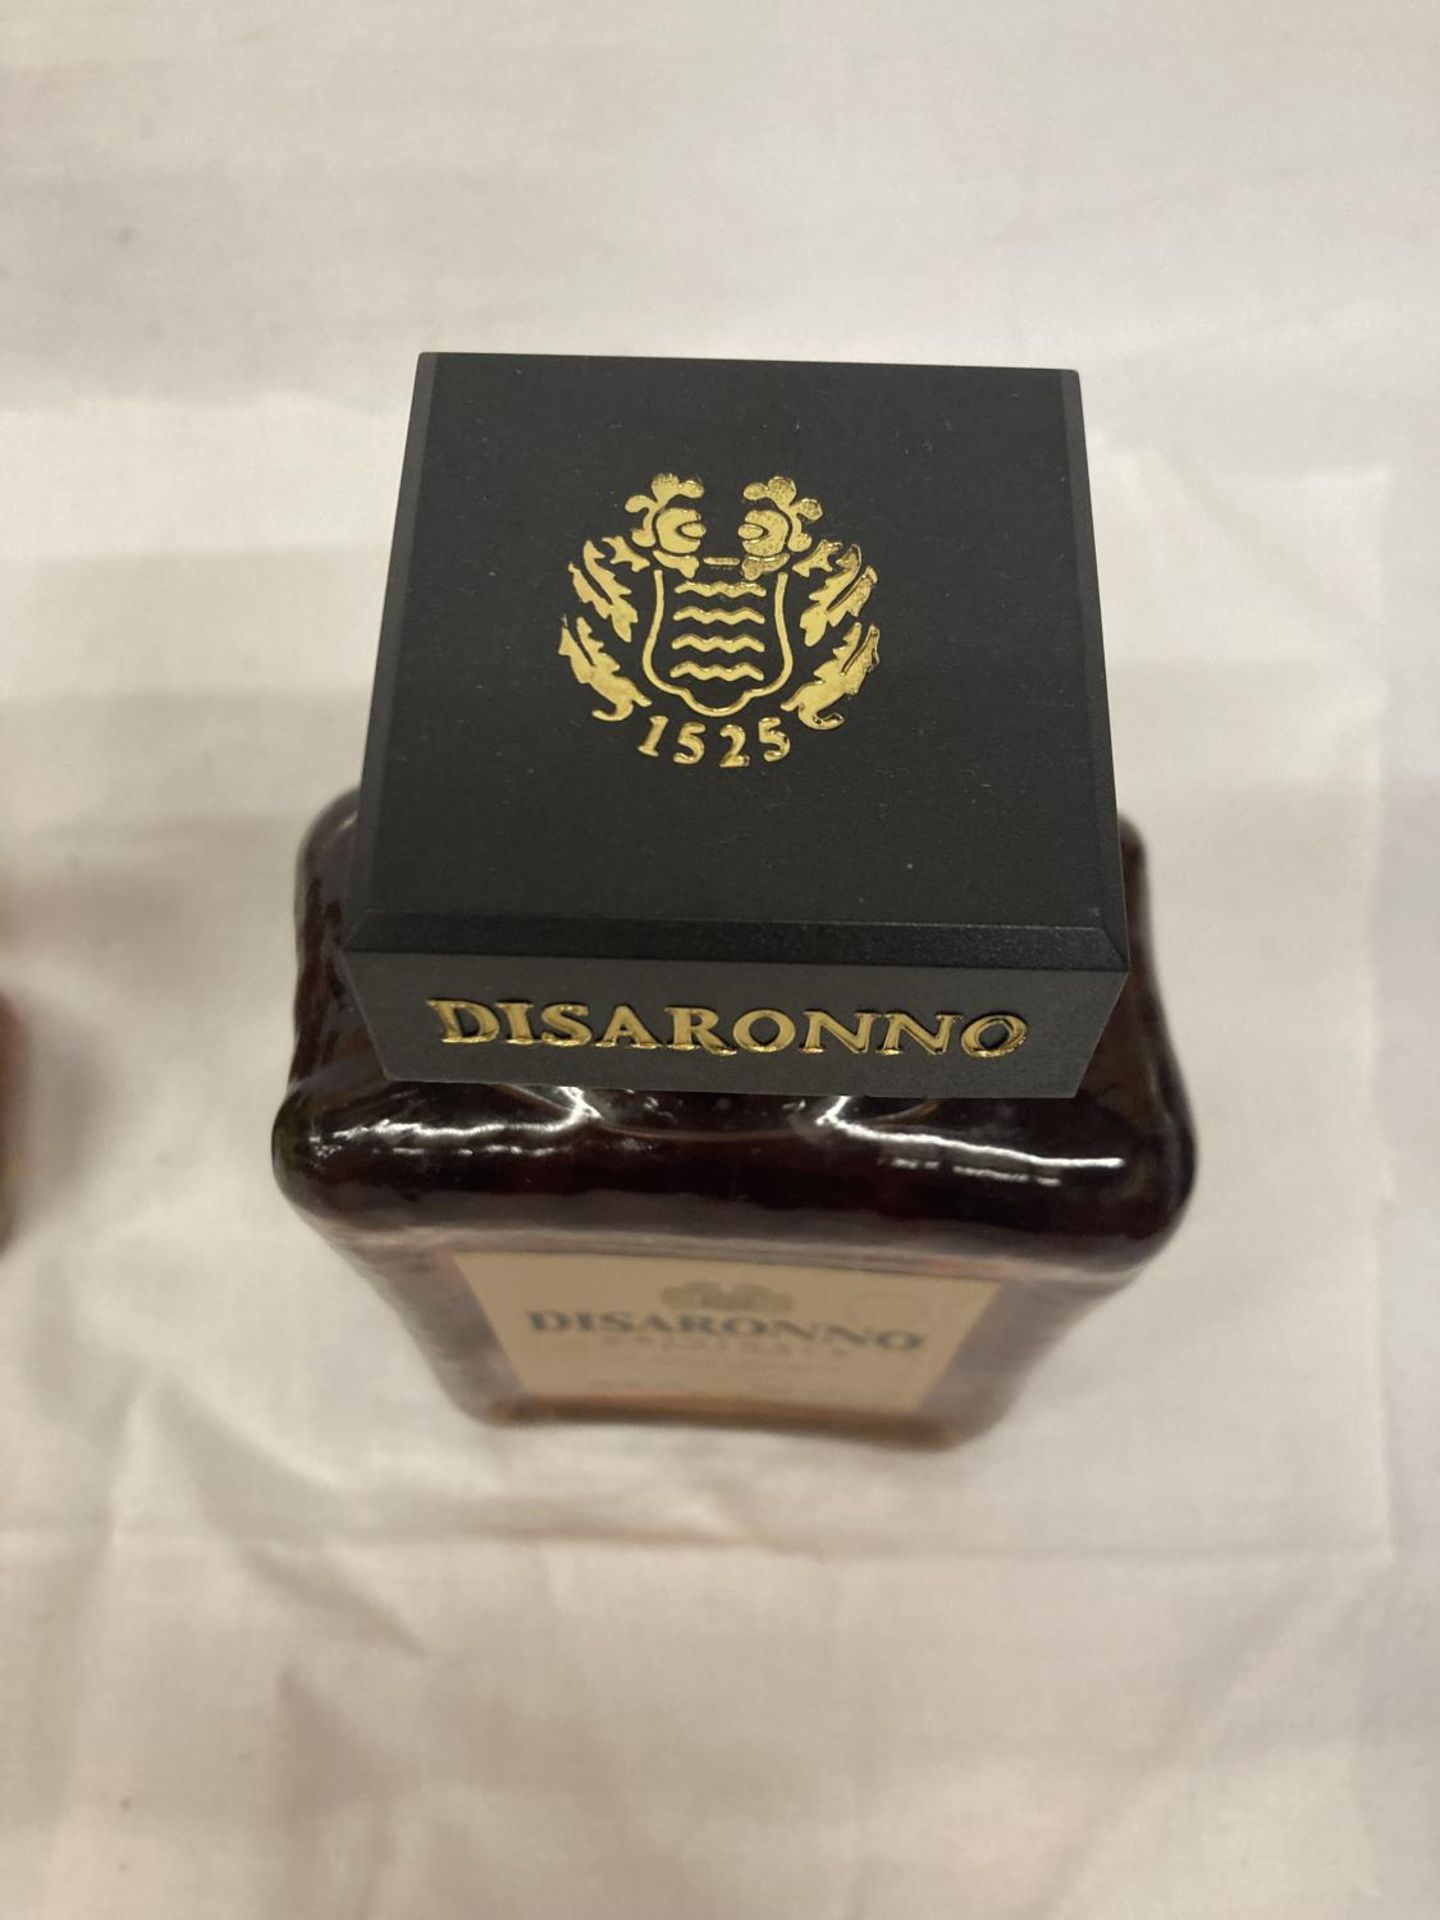 TWO 500ML BOTTLES OF DISARONNO - Image 4 of 4